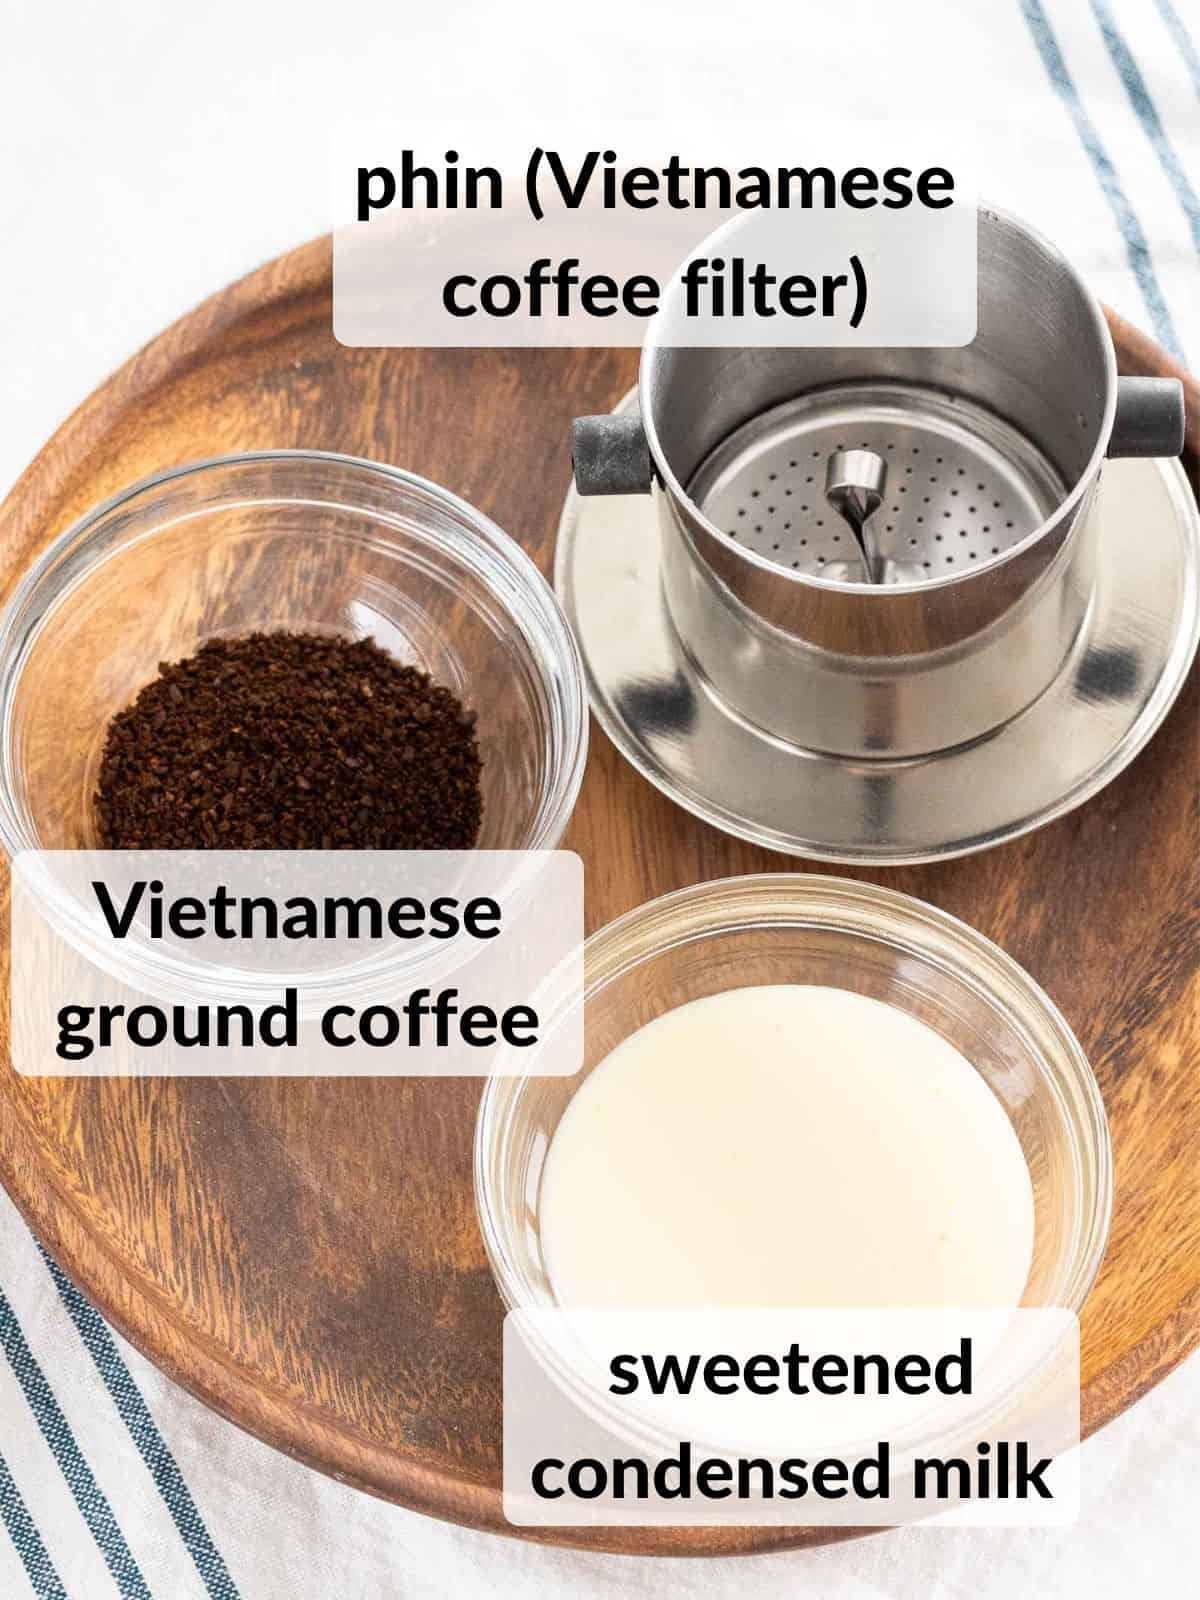 Phin filter and ingredients to make Vietnamese coffee.